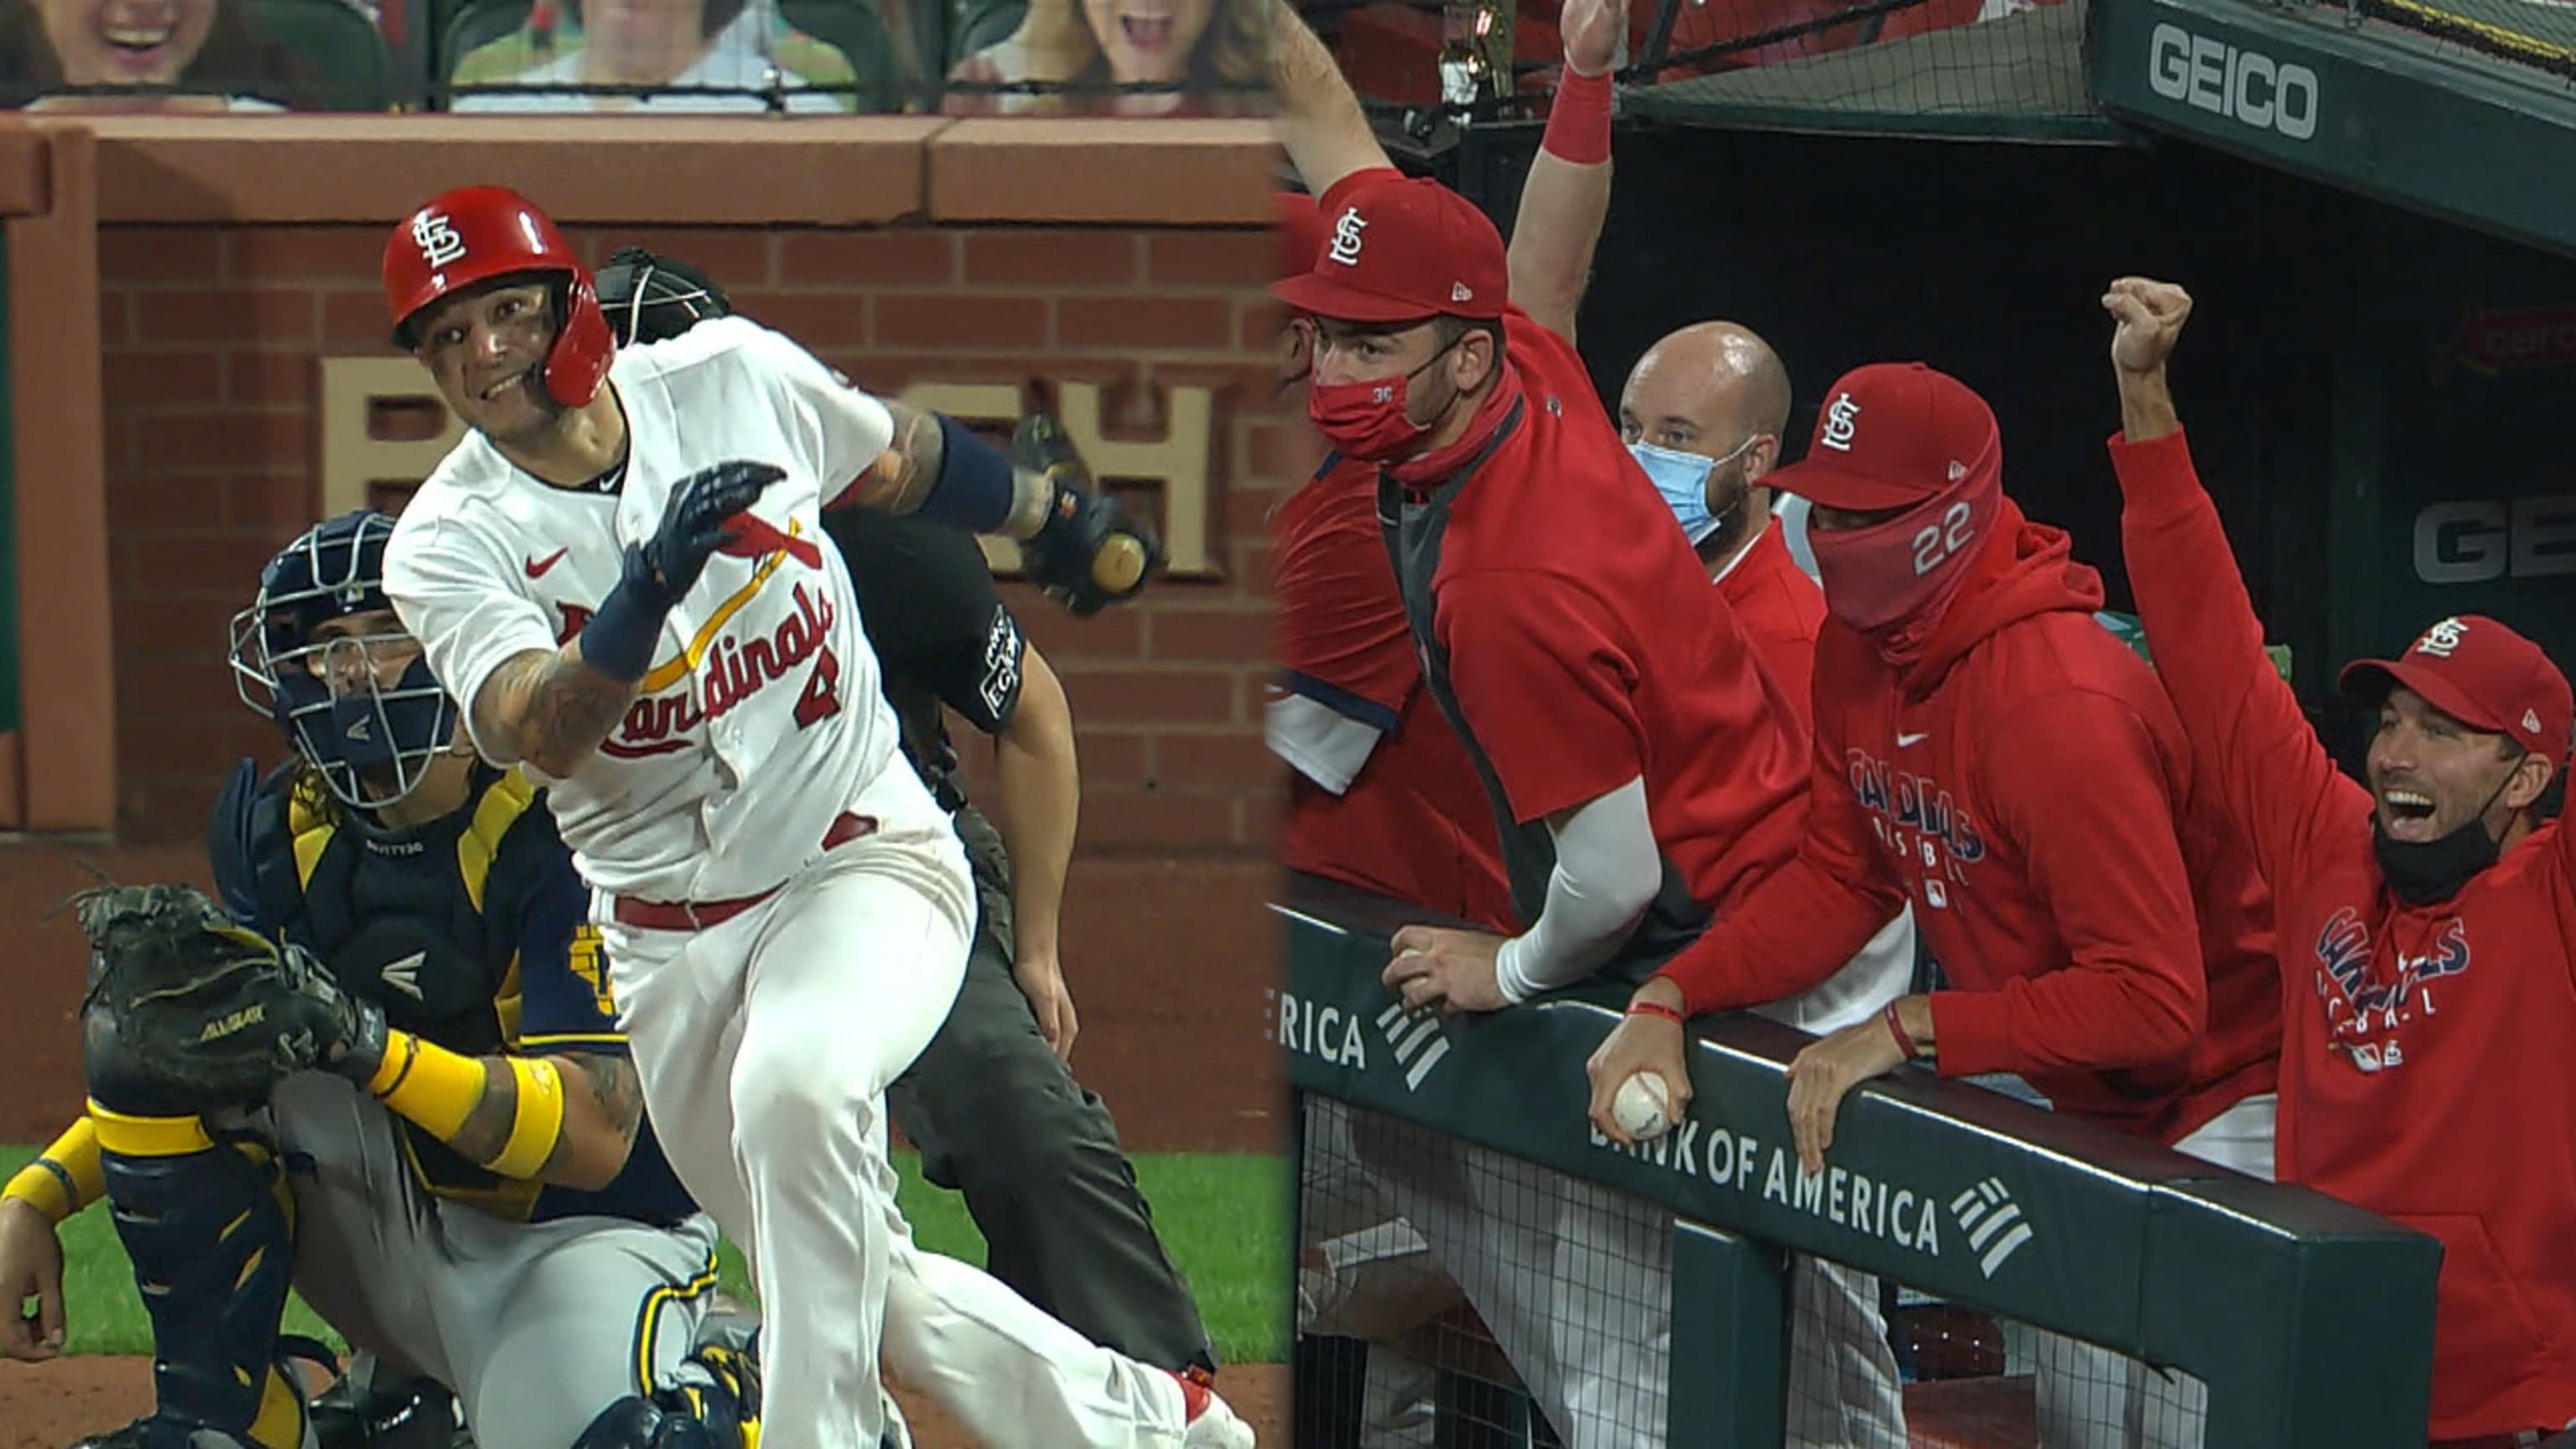 Yadier Molina news: Cardinals re-sign free agent to one-year deal -  DraftKings Network